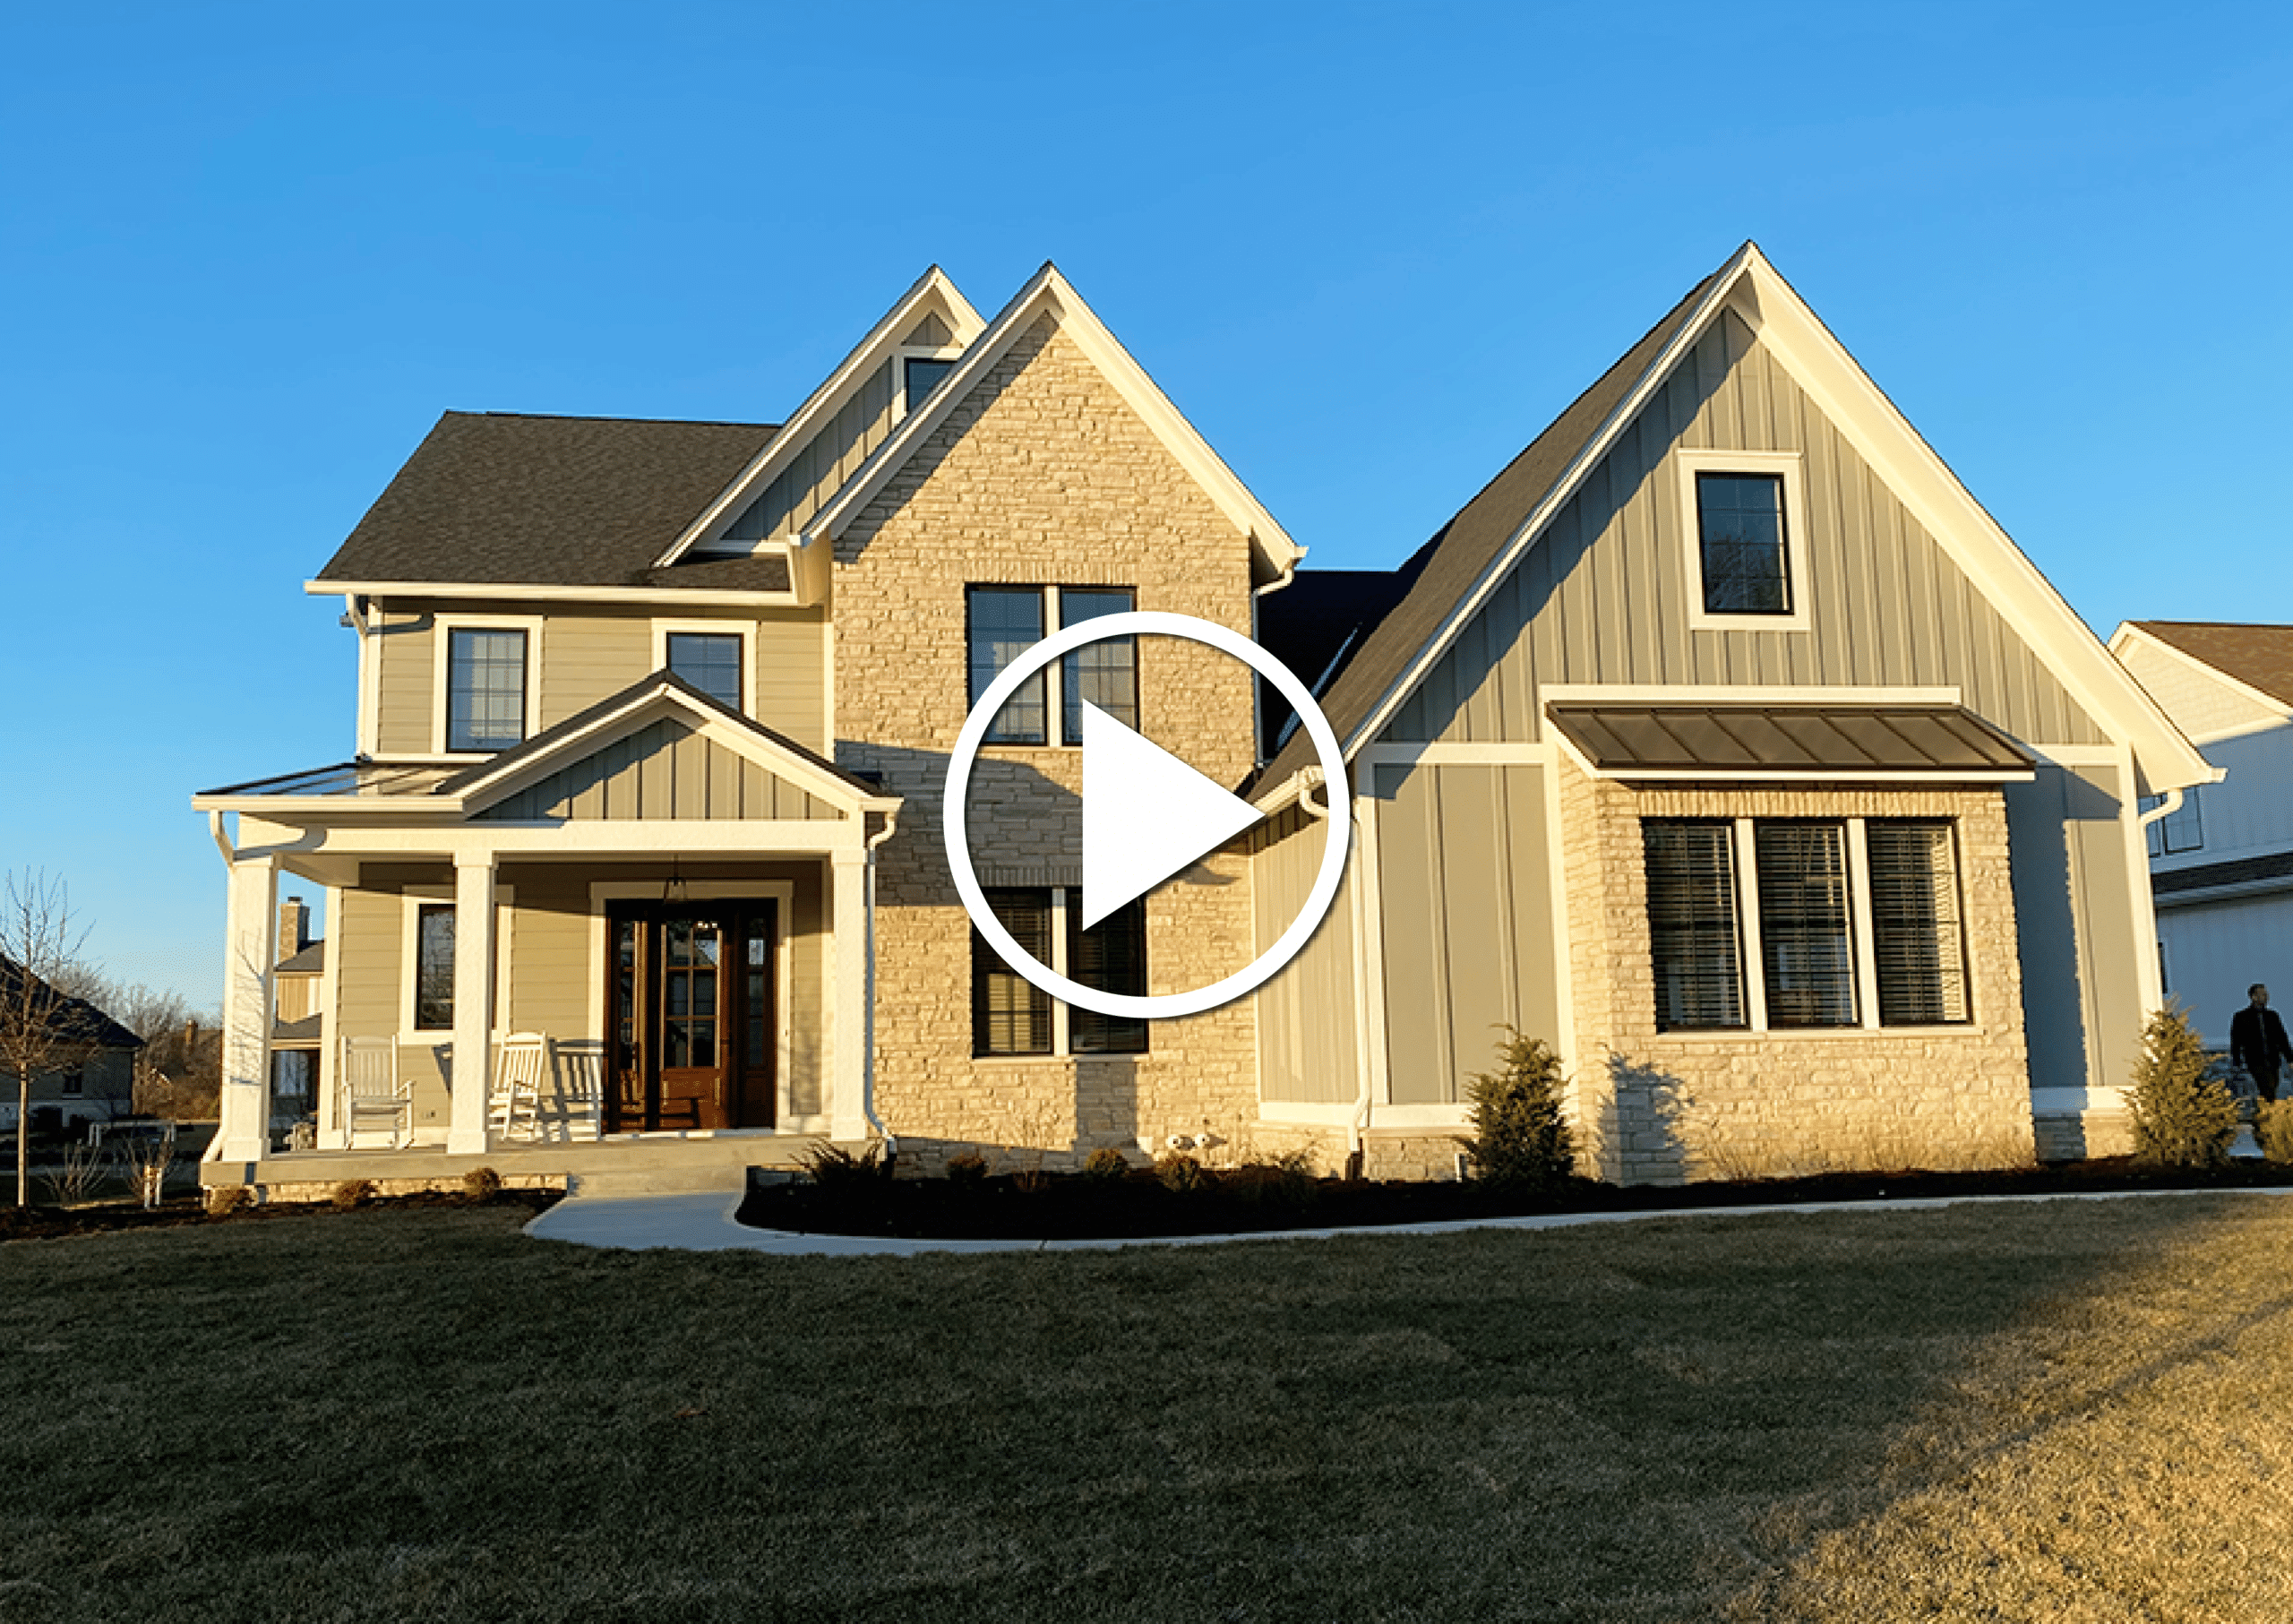 A video showcasing the exterior of a custom home in Carmel, Indiana.